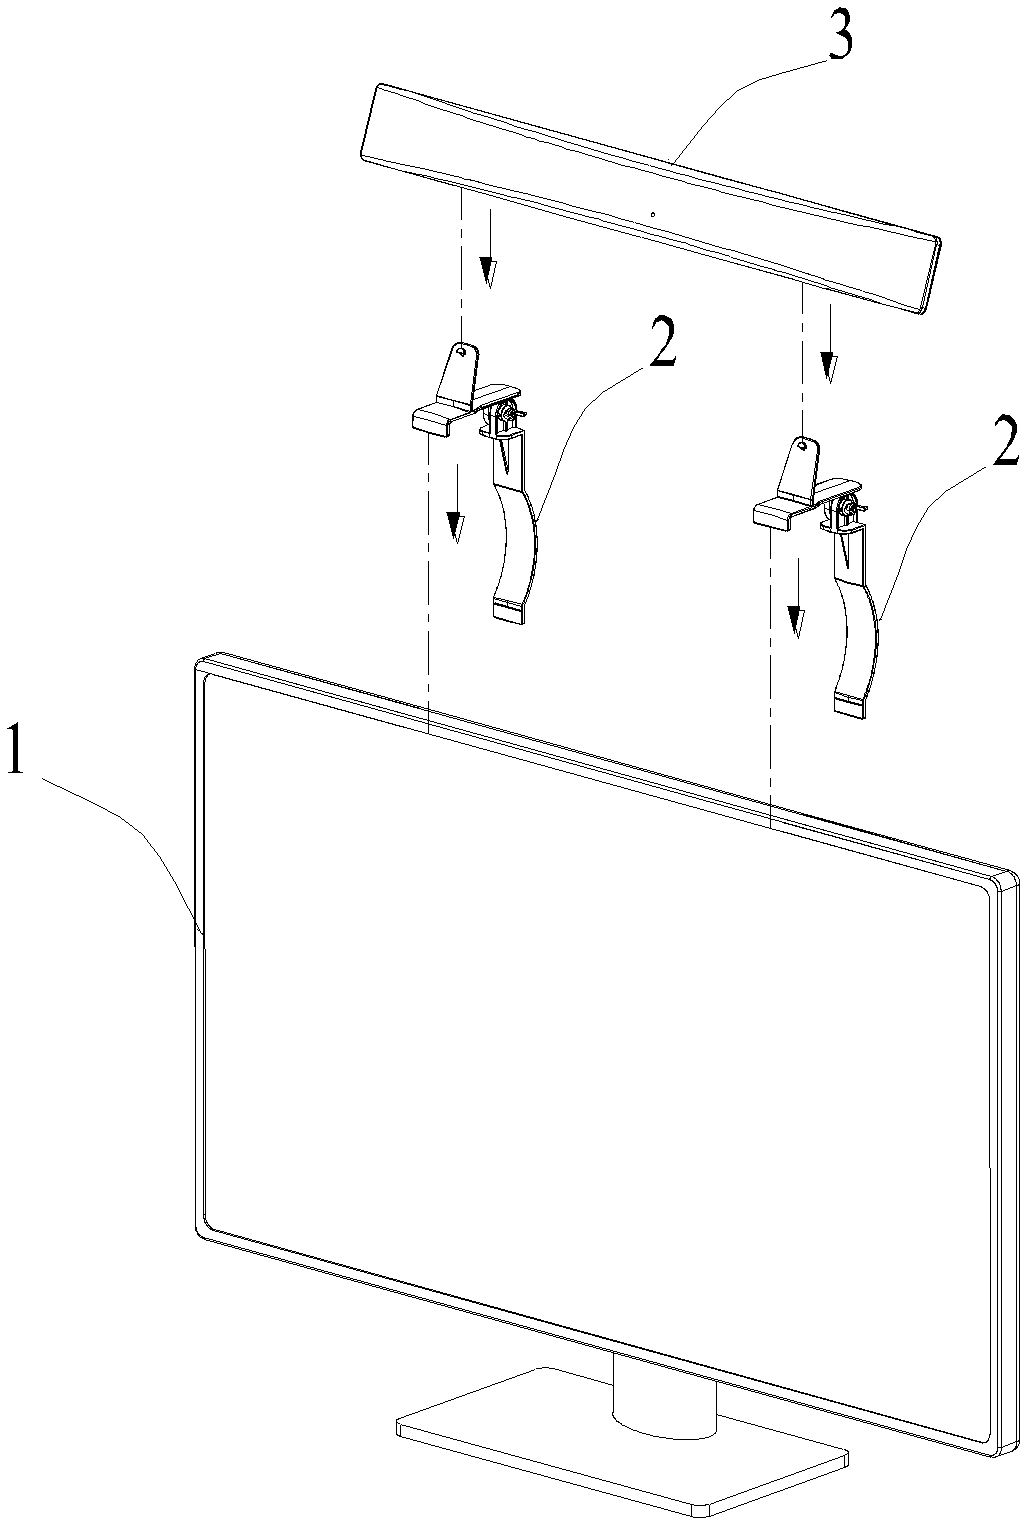 A flat-panel TV antenna bracket and flat-panel TV antenna system and installation structure